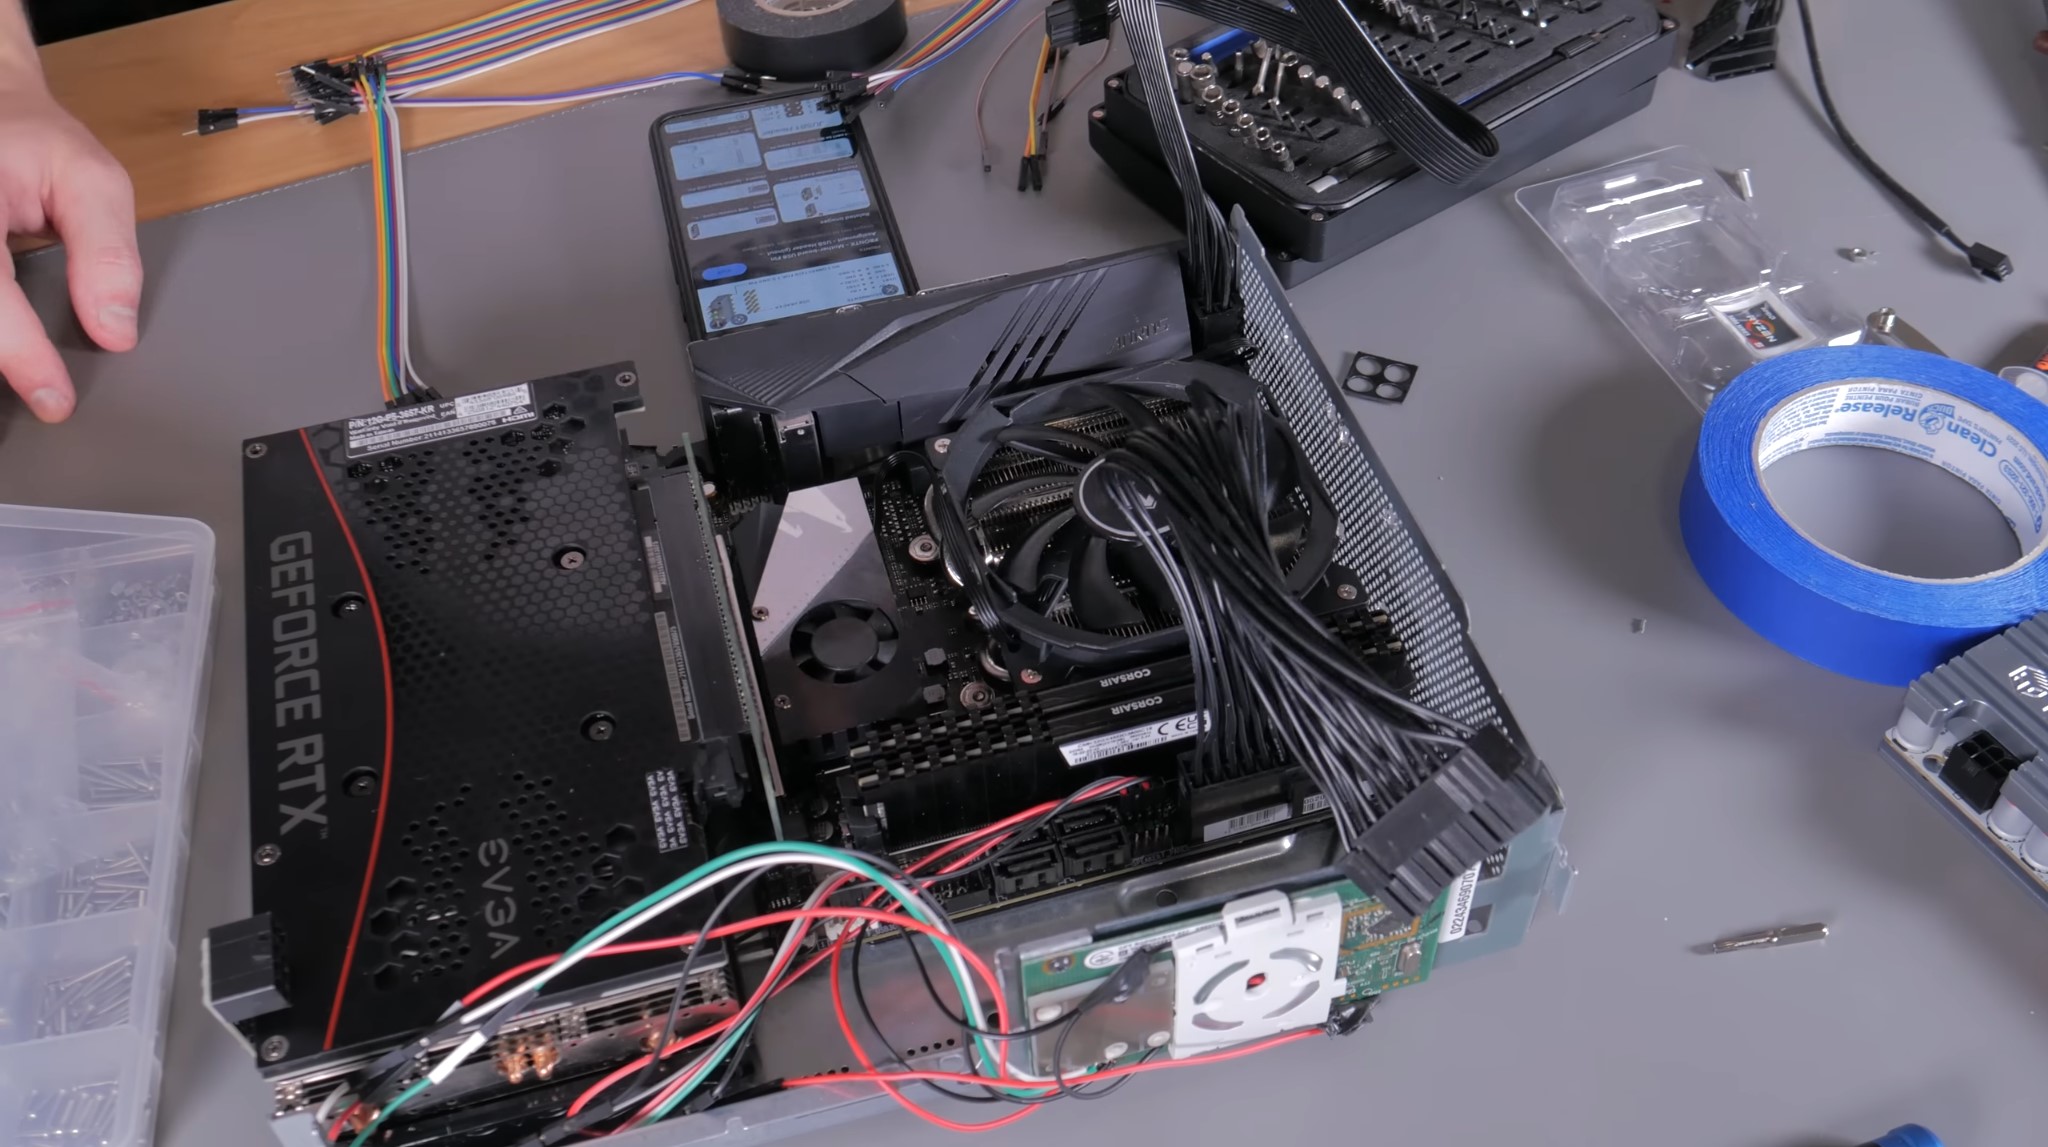 Internals of Xbox 360 gaming PC demonstrating cooling, graphics, motherboard all squished together in very close proximity.